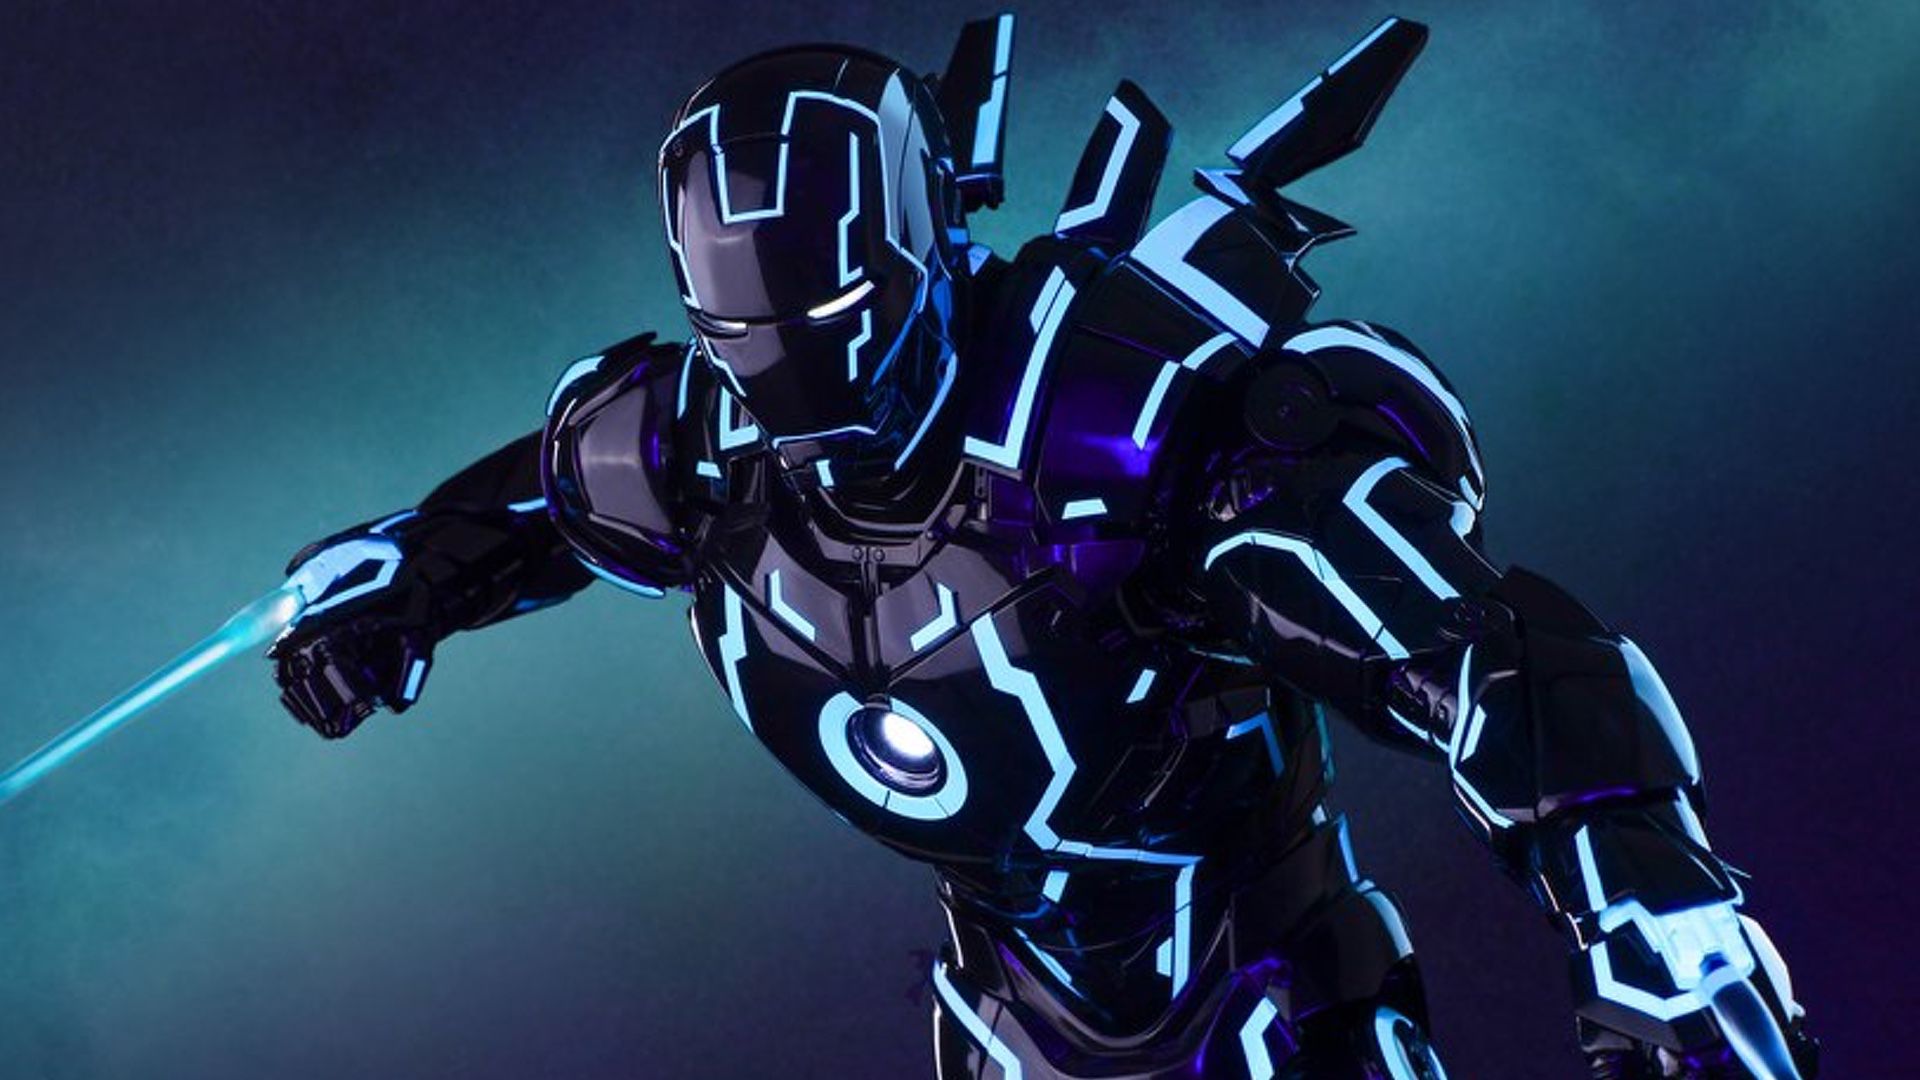 This IRON MAN And TRON Mashup Action Figure Is Too Cool For Words